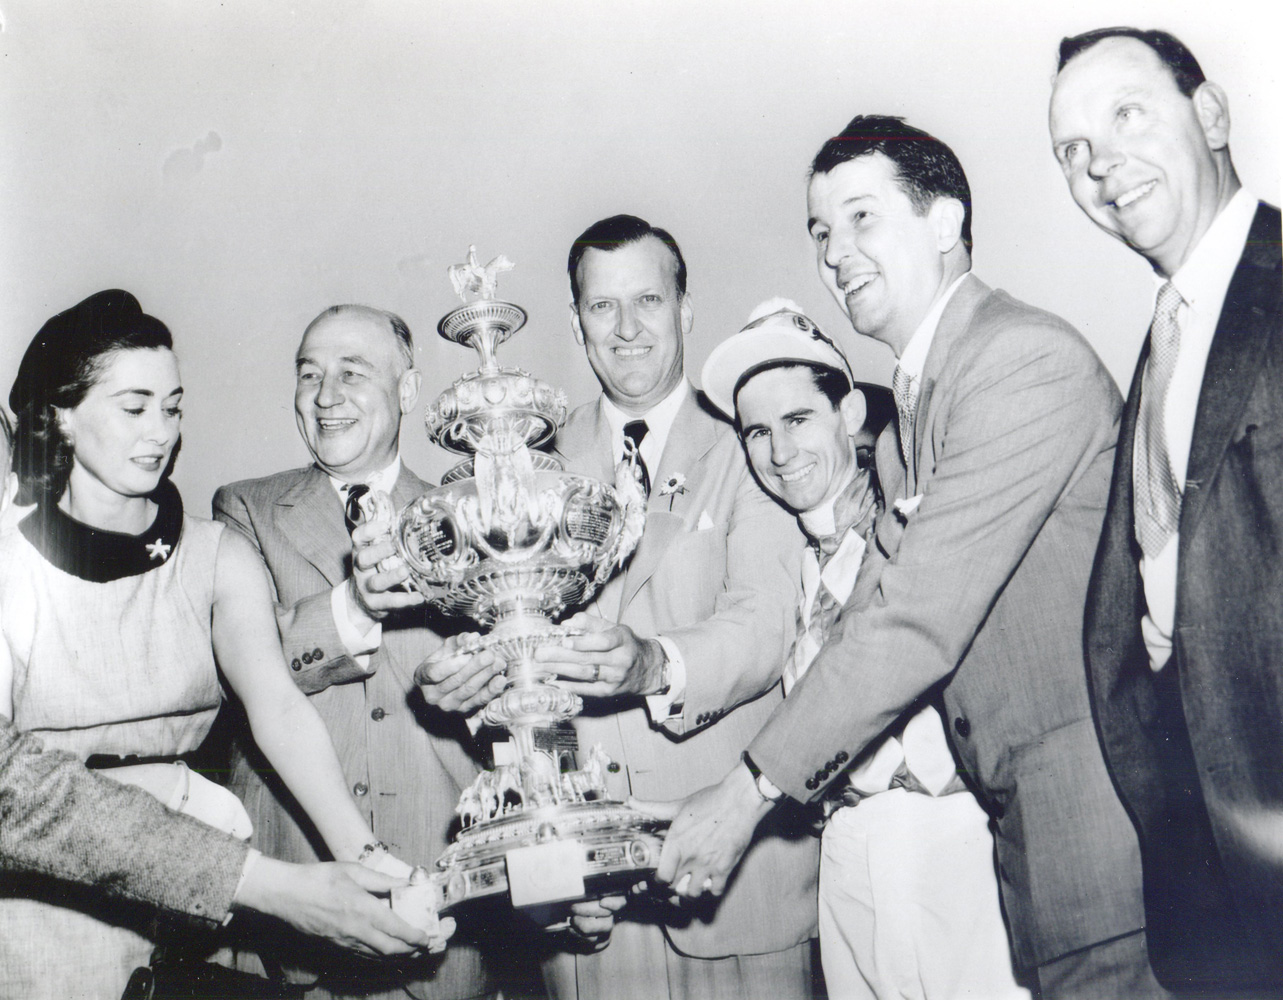 Mr. and Mrs. Alfred G. Vanderbilt, George M. Humphrey, Theodore R. McKeldin, jockey Eric Guerin, and trainer W. C. Winfrey celebrate Native Dancer's win at the 1953 Preakness trophy presentation (Keeneland Library Morgan Collection/Museum Collection)